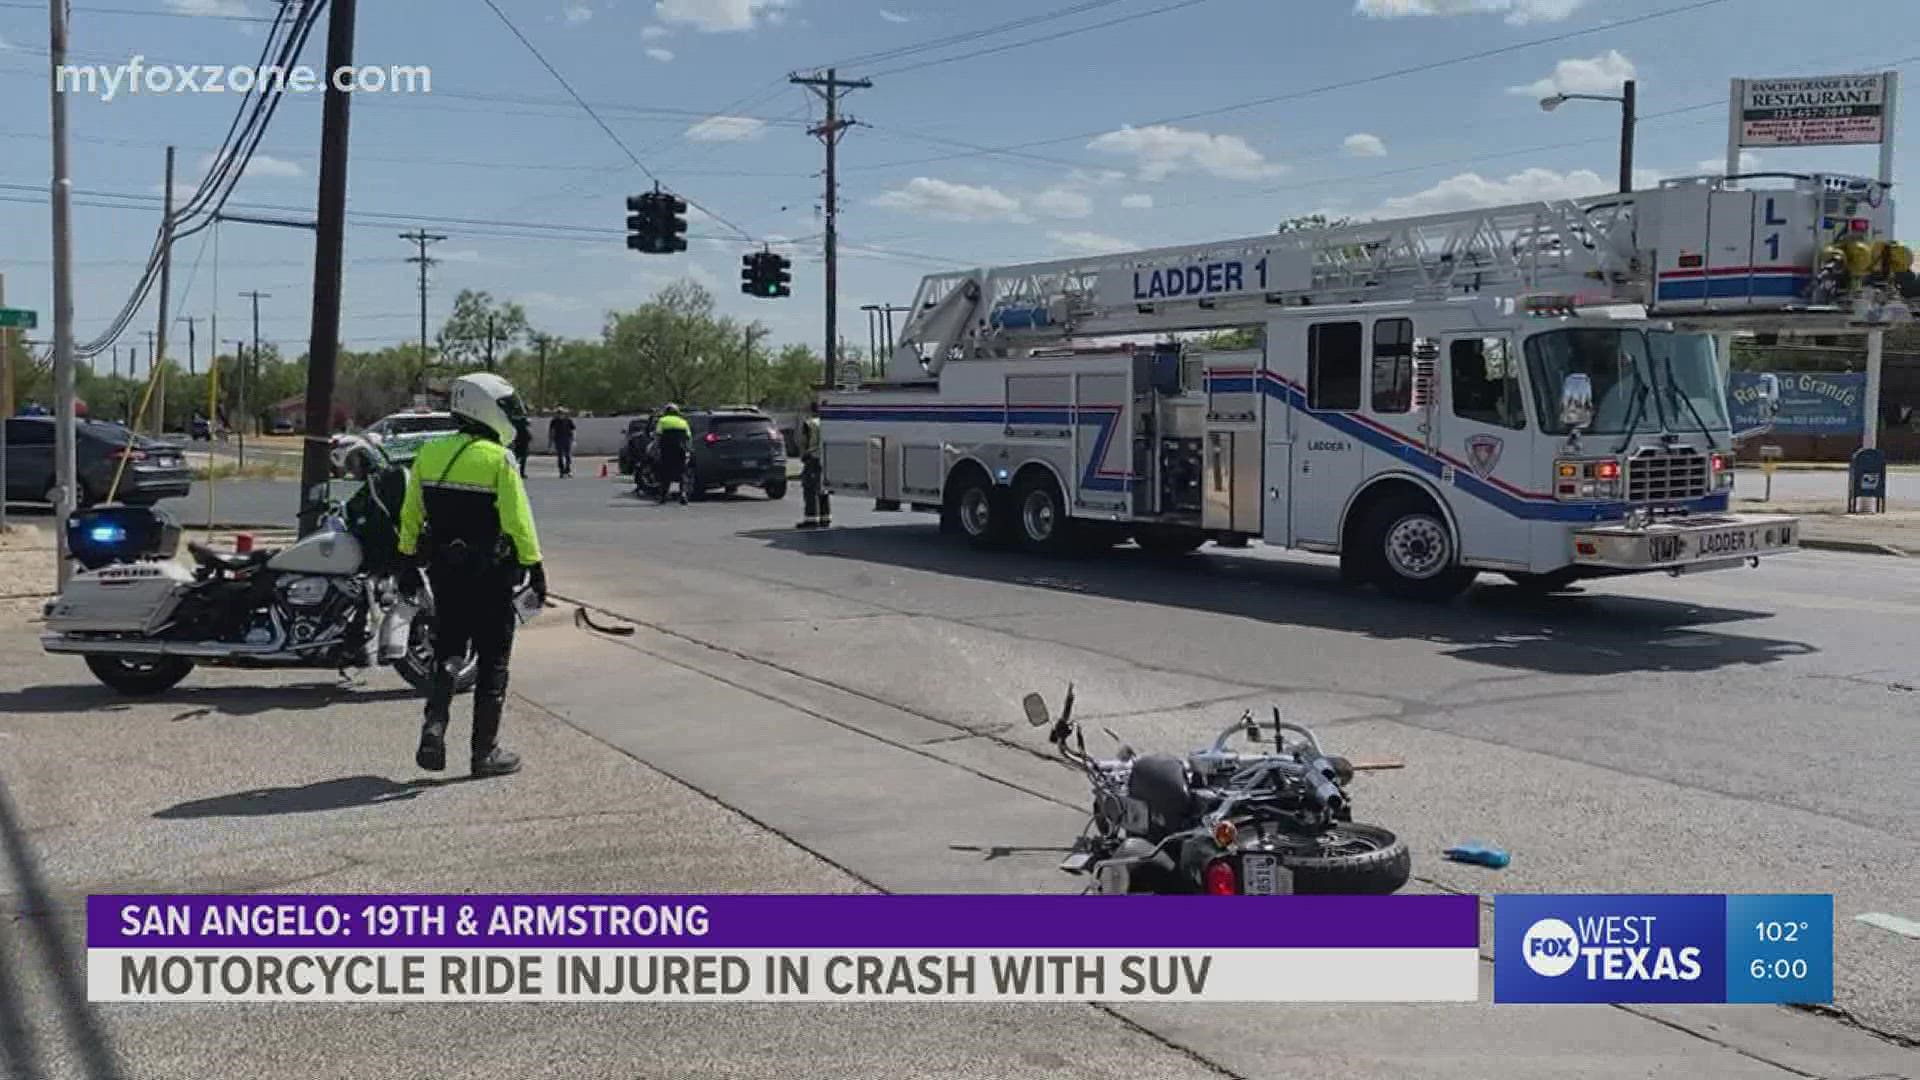 The motorcycle rider, a 71-year-old man, was unconscious, but breathing when officers reached the scene.